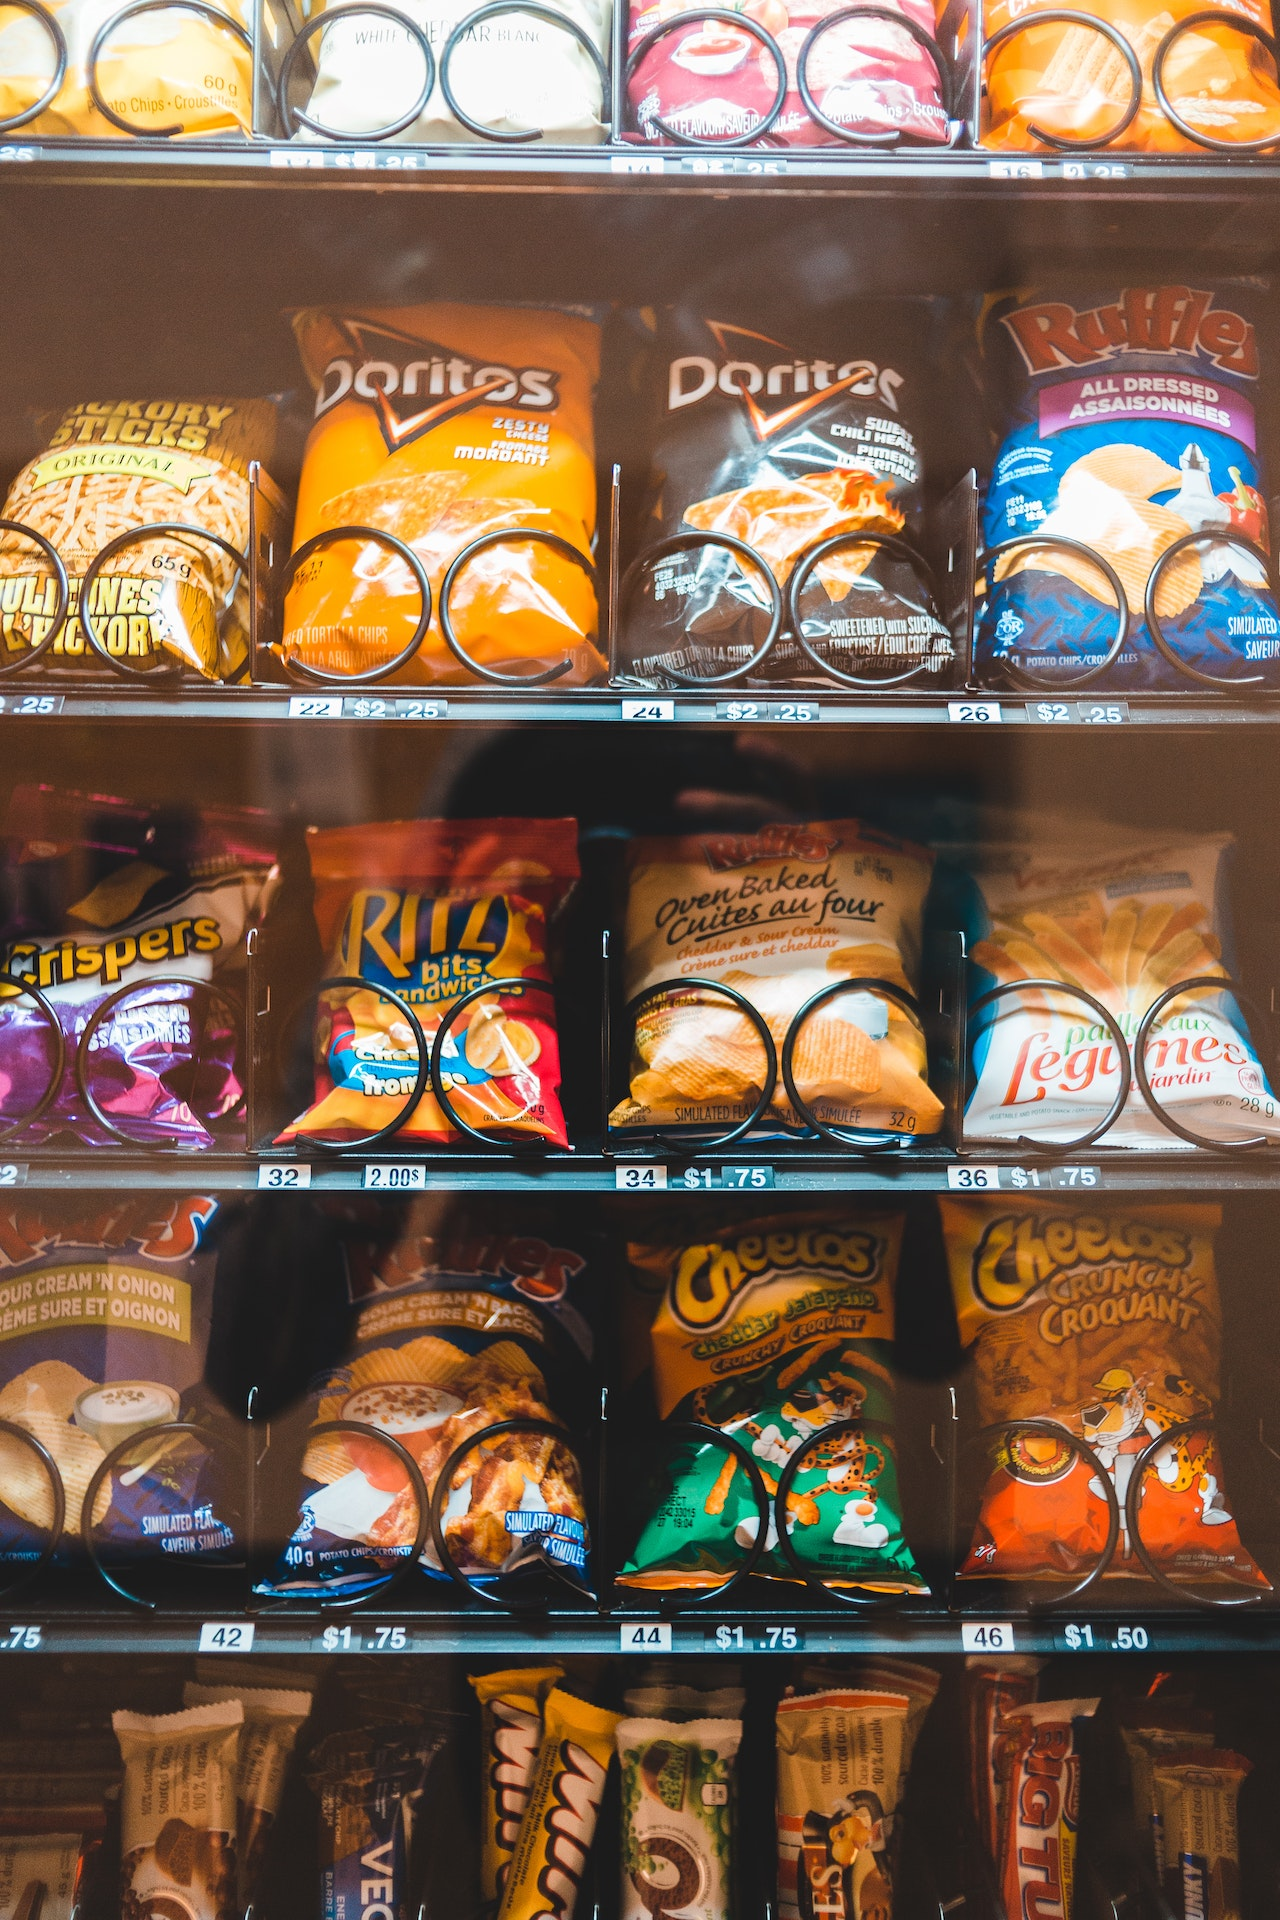 How to start a vending machine business: Buying Vending machine inventory